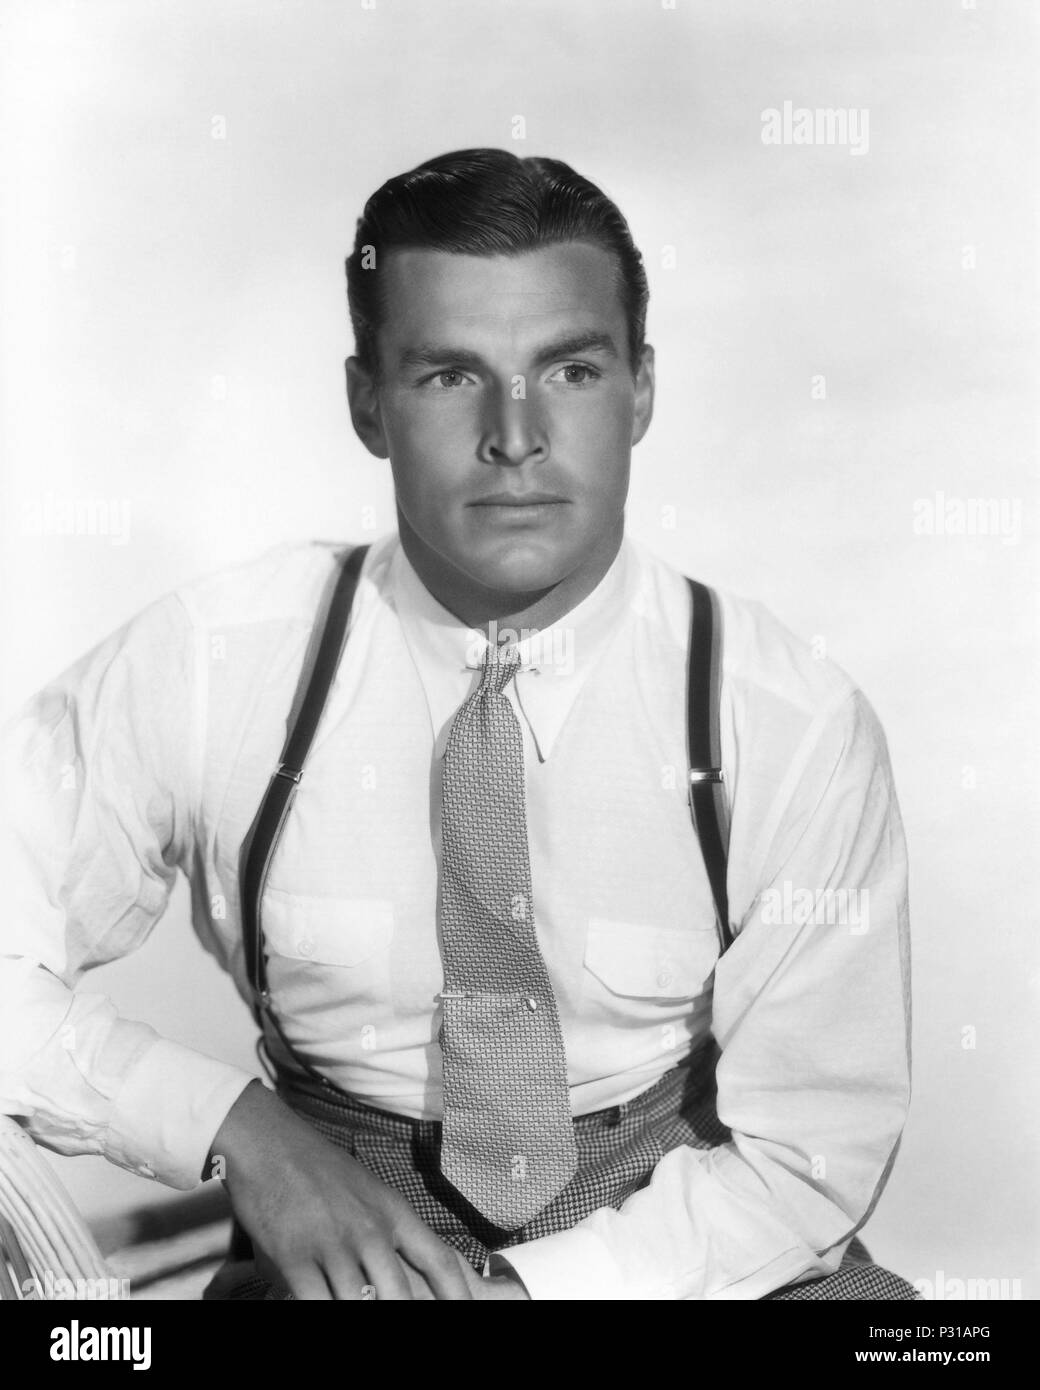 Buster Larry Crabbe Editorial Stock Photo - Stock Image